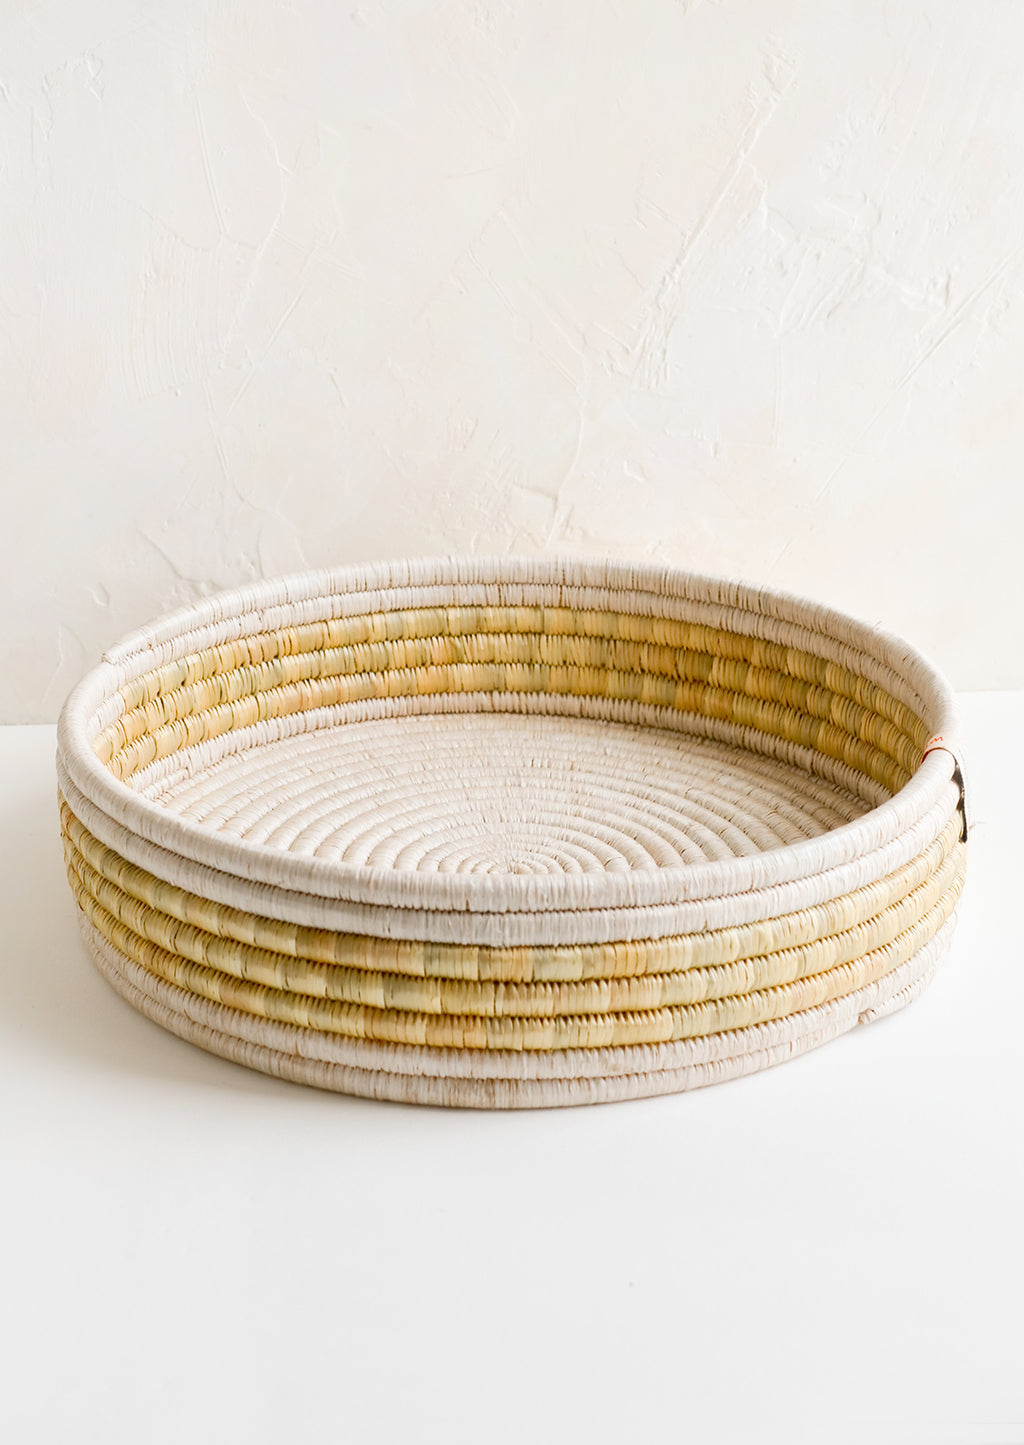 1: A round, shallow woven seagrass tray in white and beige.